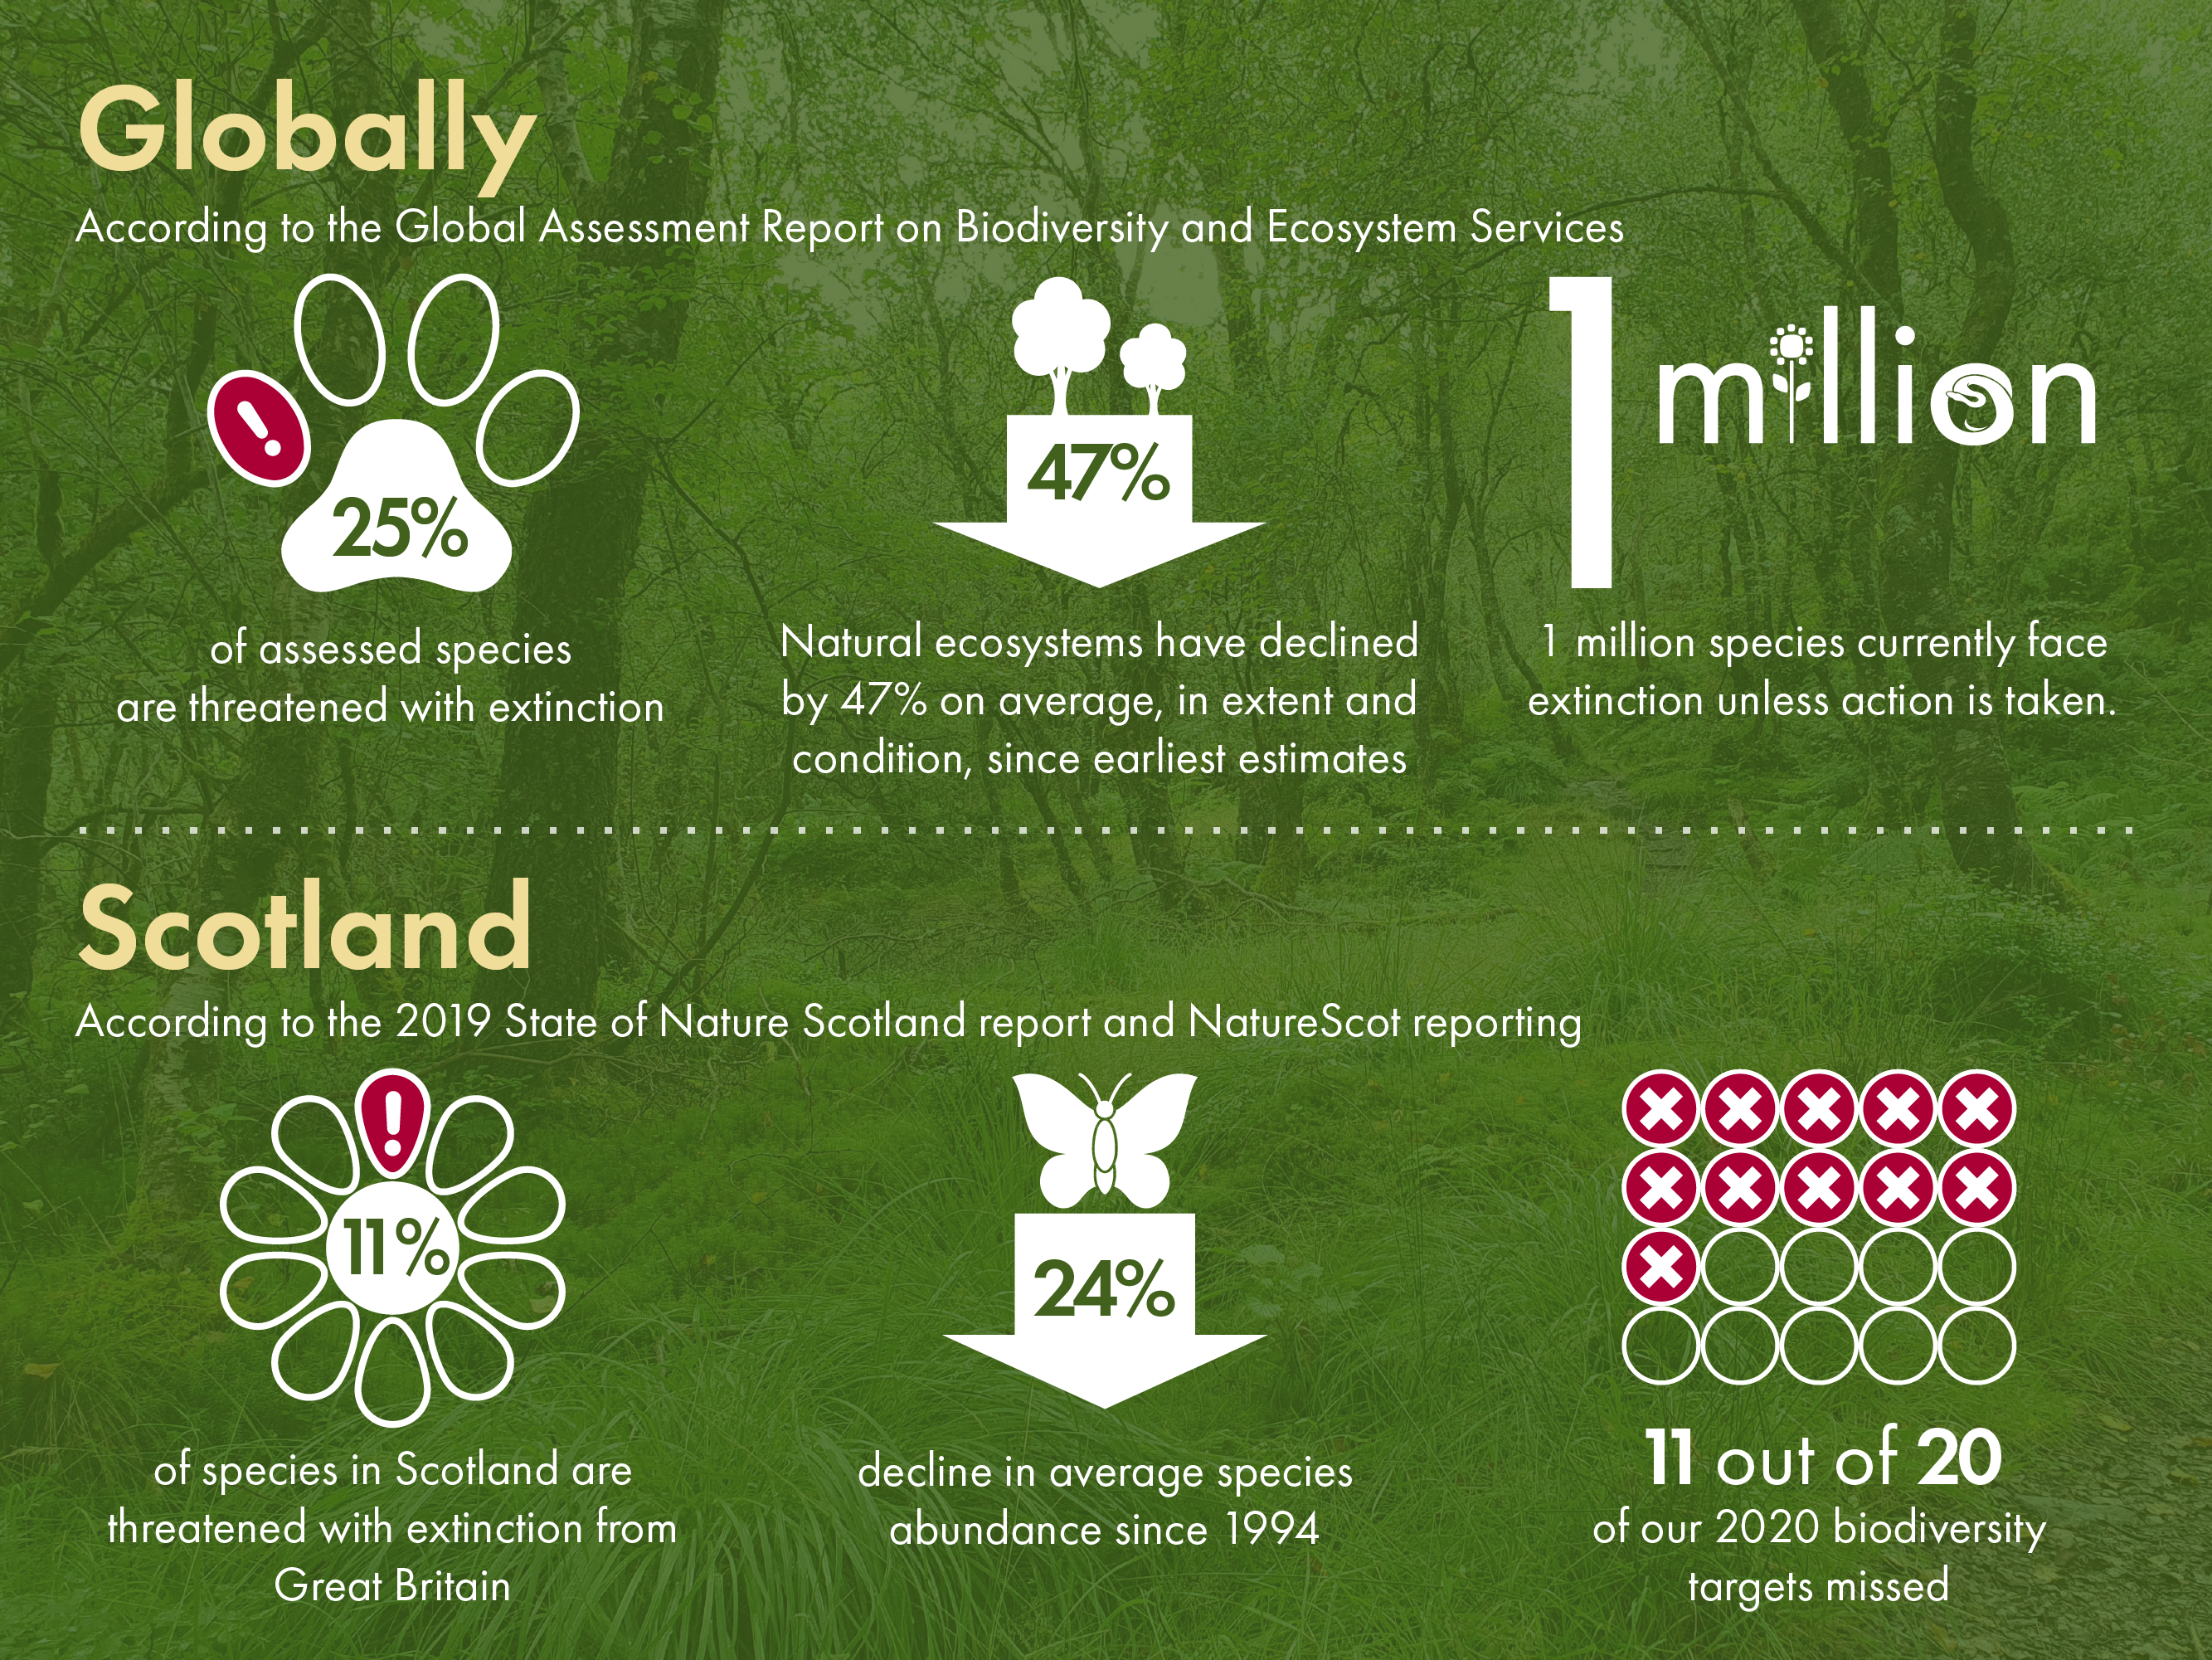 Key reports in recent years show nature is in decline in Scotland and globally.